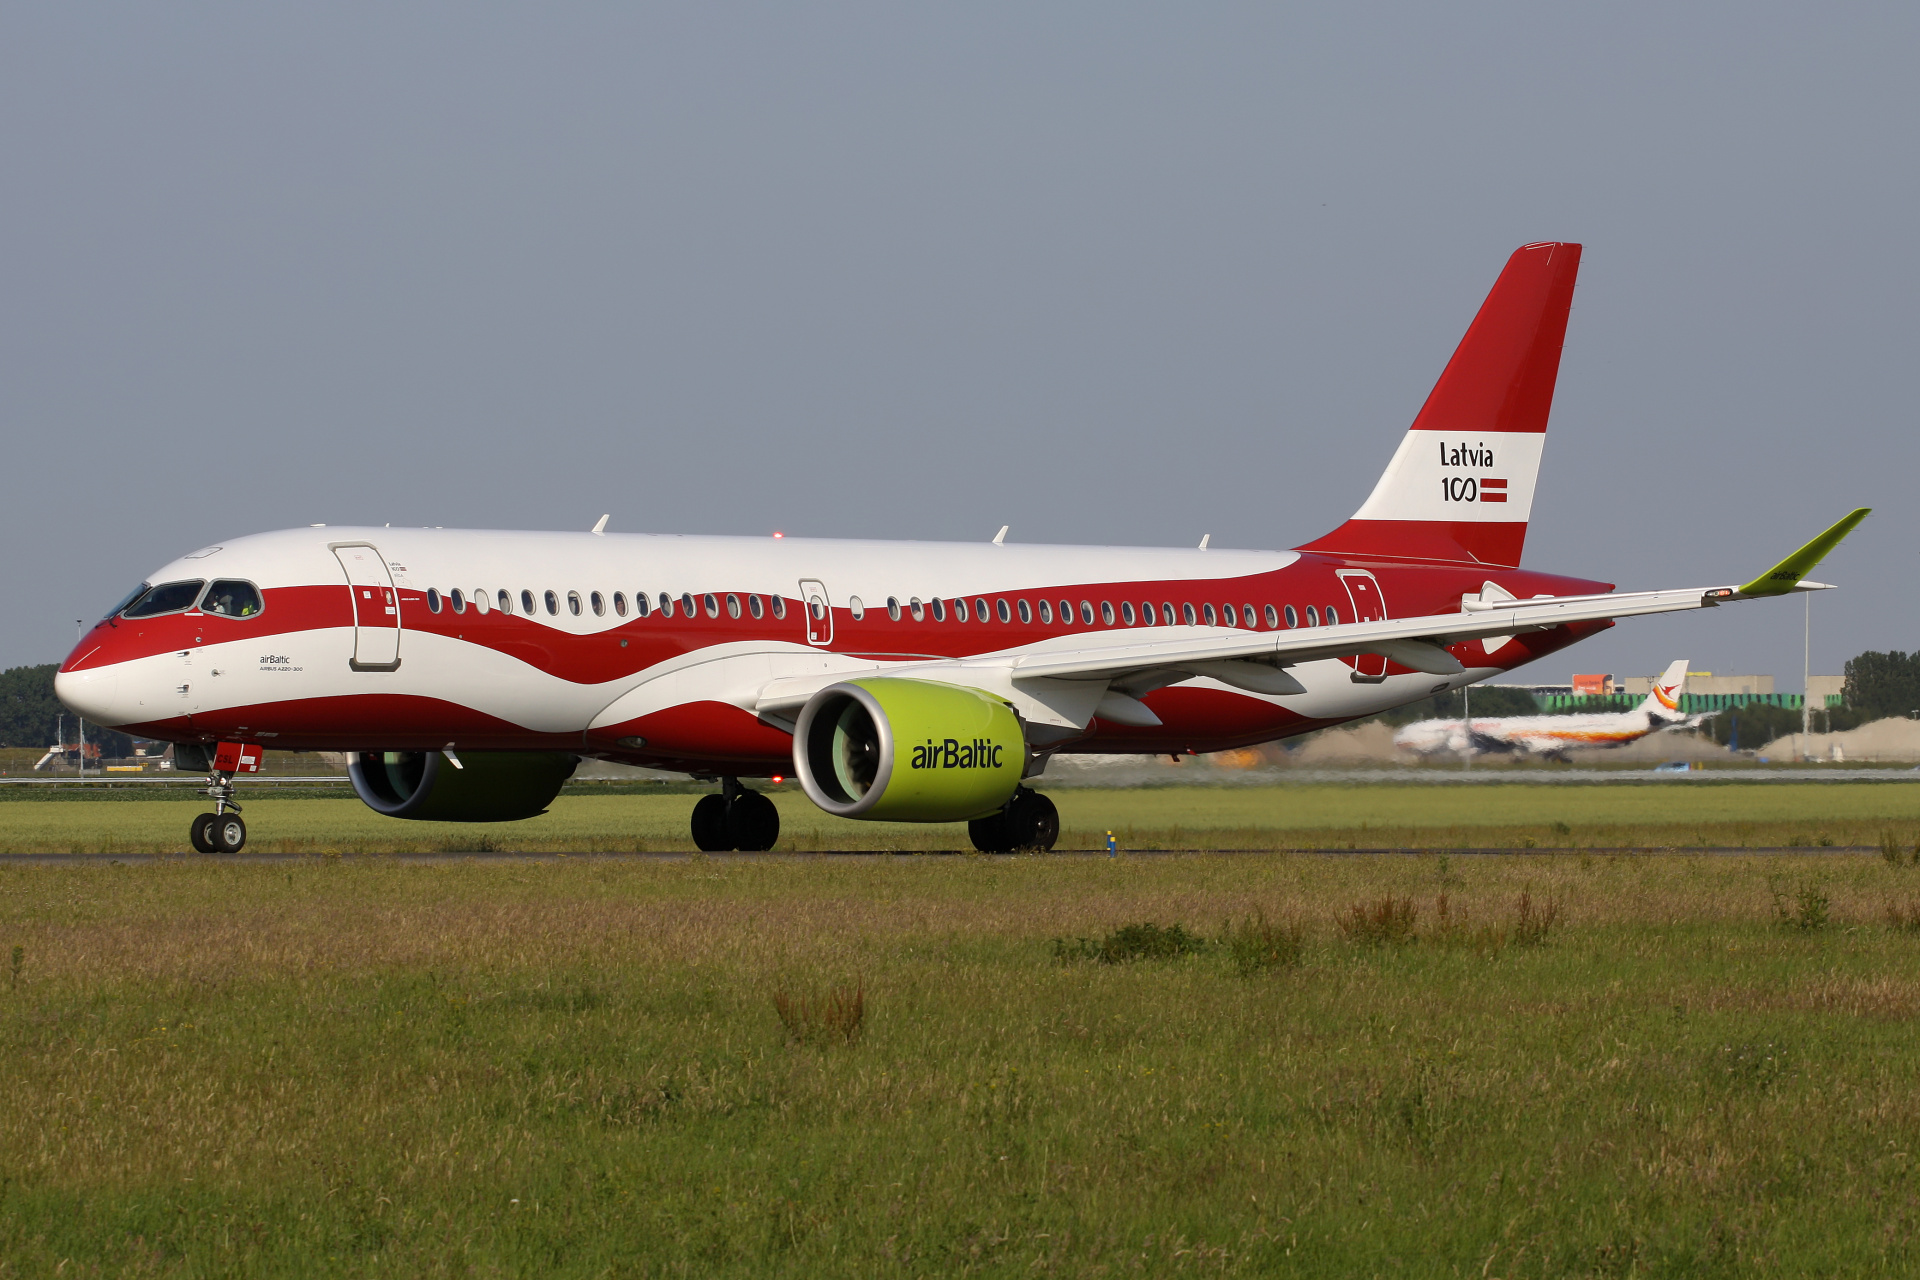 YL-CSL, airBaltic (100 Years of Latvia livery) (Aircraft » Schiphol Spotting » Airbus A220-300)